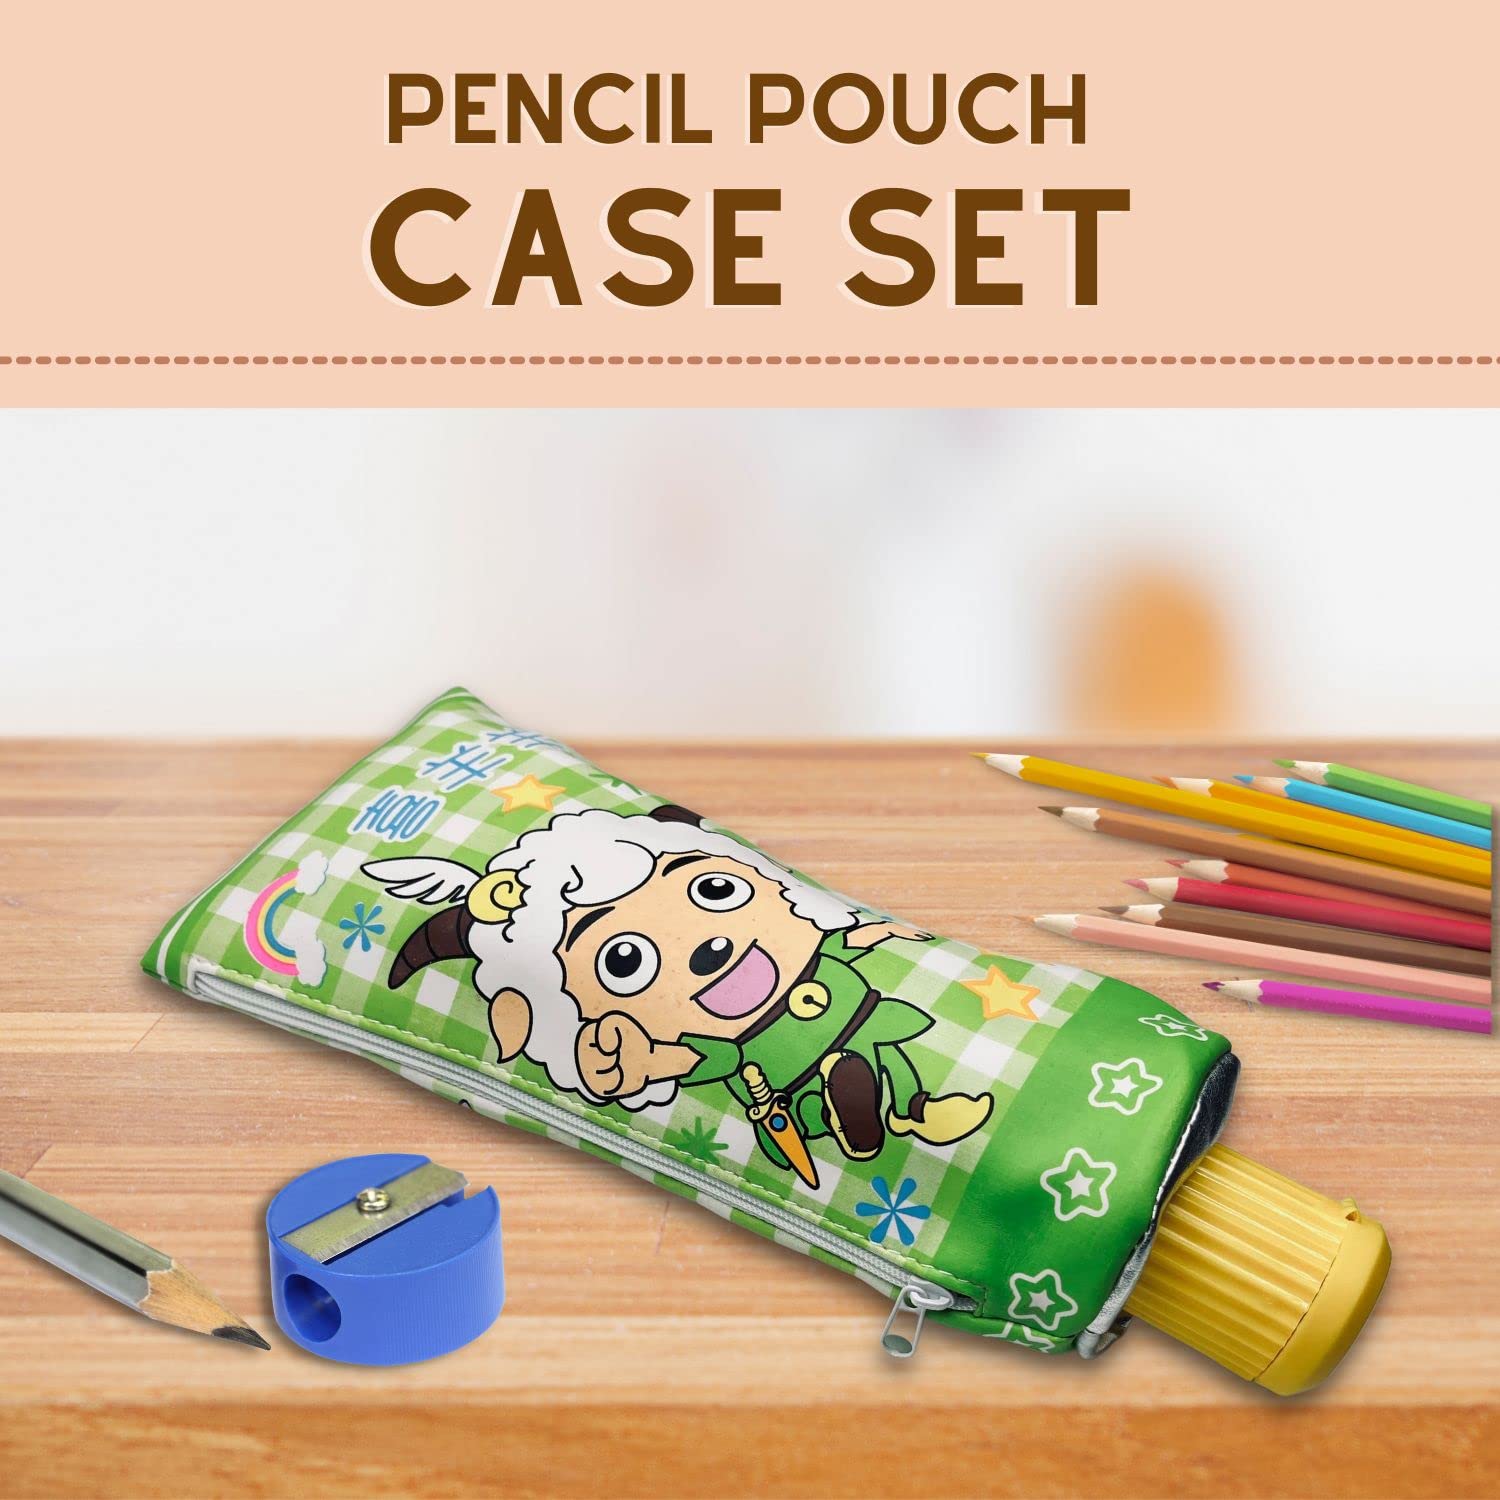 Kids Mandi pencil case, school stationery supply pouch for students.